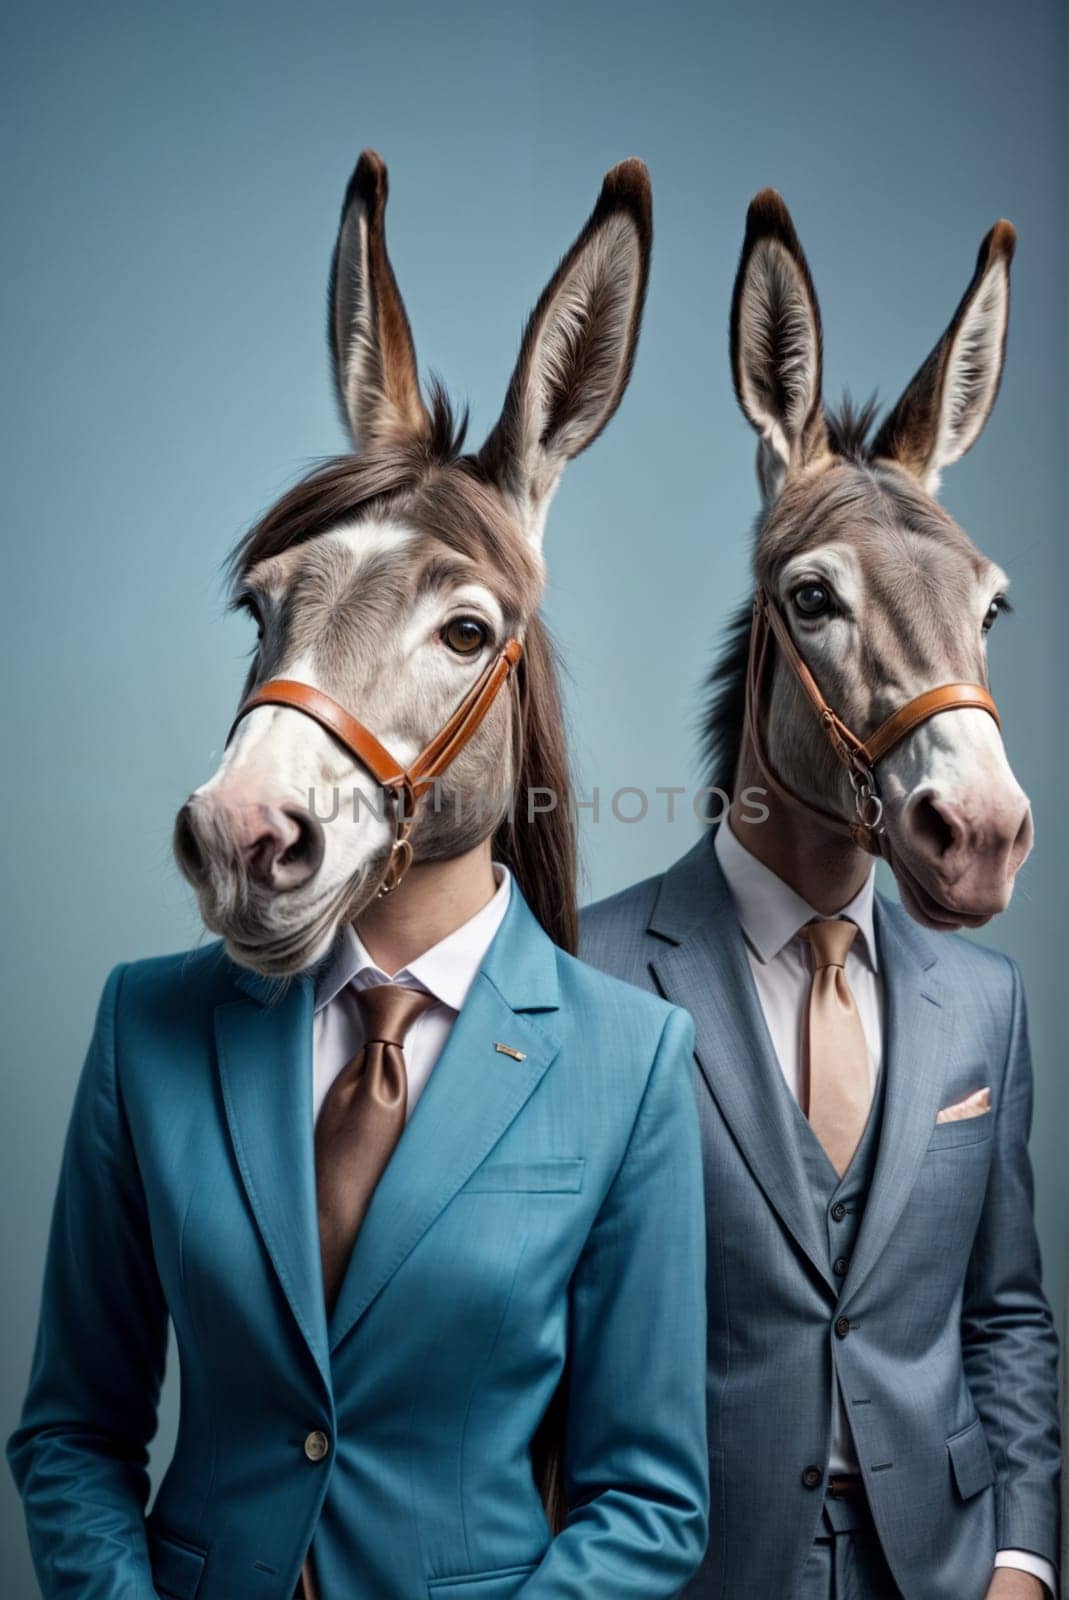 Two funny anthropomorphic confident donkeys are dressed in formal attire, wearing suits and ties. by verbano